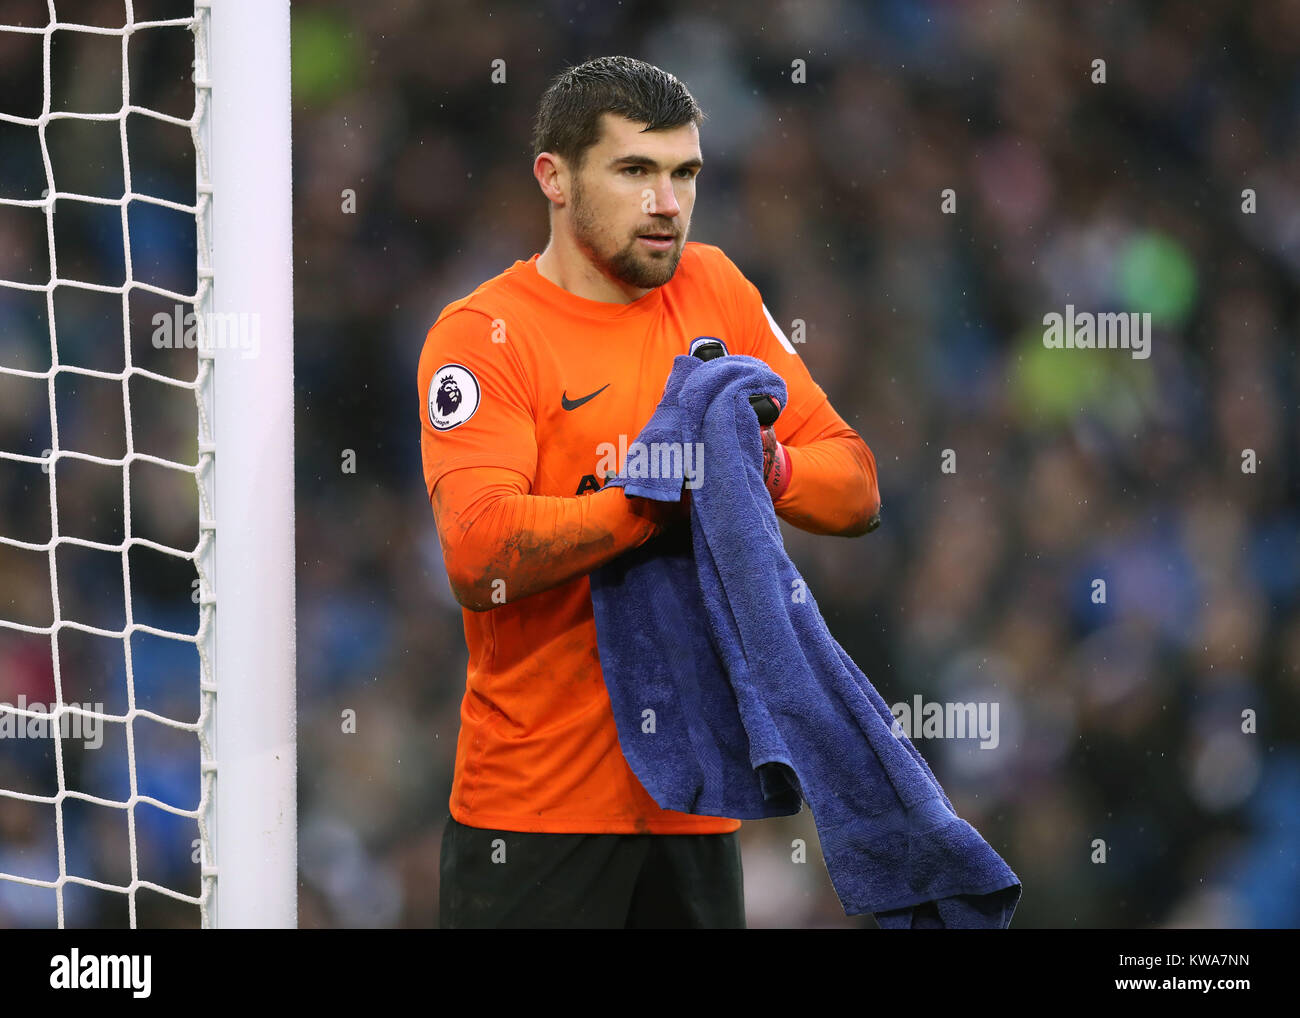 Brighton & Hove Albion goalkeeper Mathew Ryan during the Premier League match at the AMEX Stadium, Brighton. PRESS ASSOCIATION Photo. Picture date: Monday January 1, 2018. See PA story SOCCER Brighton. Photo credit should read: Adam Davy/PA Wire. RESTRICTIONS: No use with unauthorised audio, video, data, fixture lists, club/league logos or 'live' services. Online in-match use limited to 75 images, no video emulation. No use in betting, games or single club/league/player publications. Stock Photo